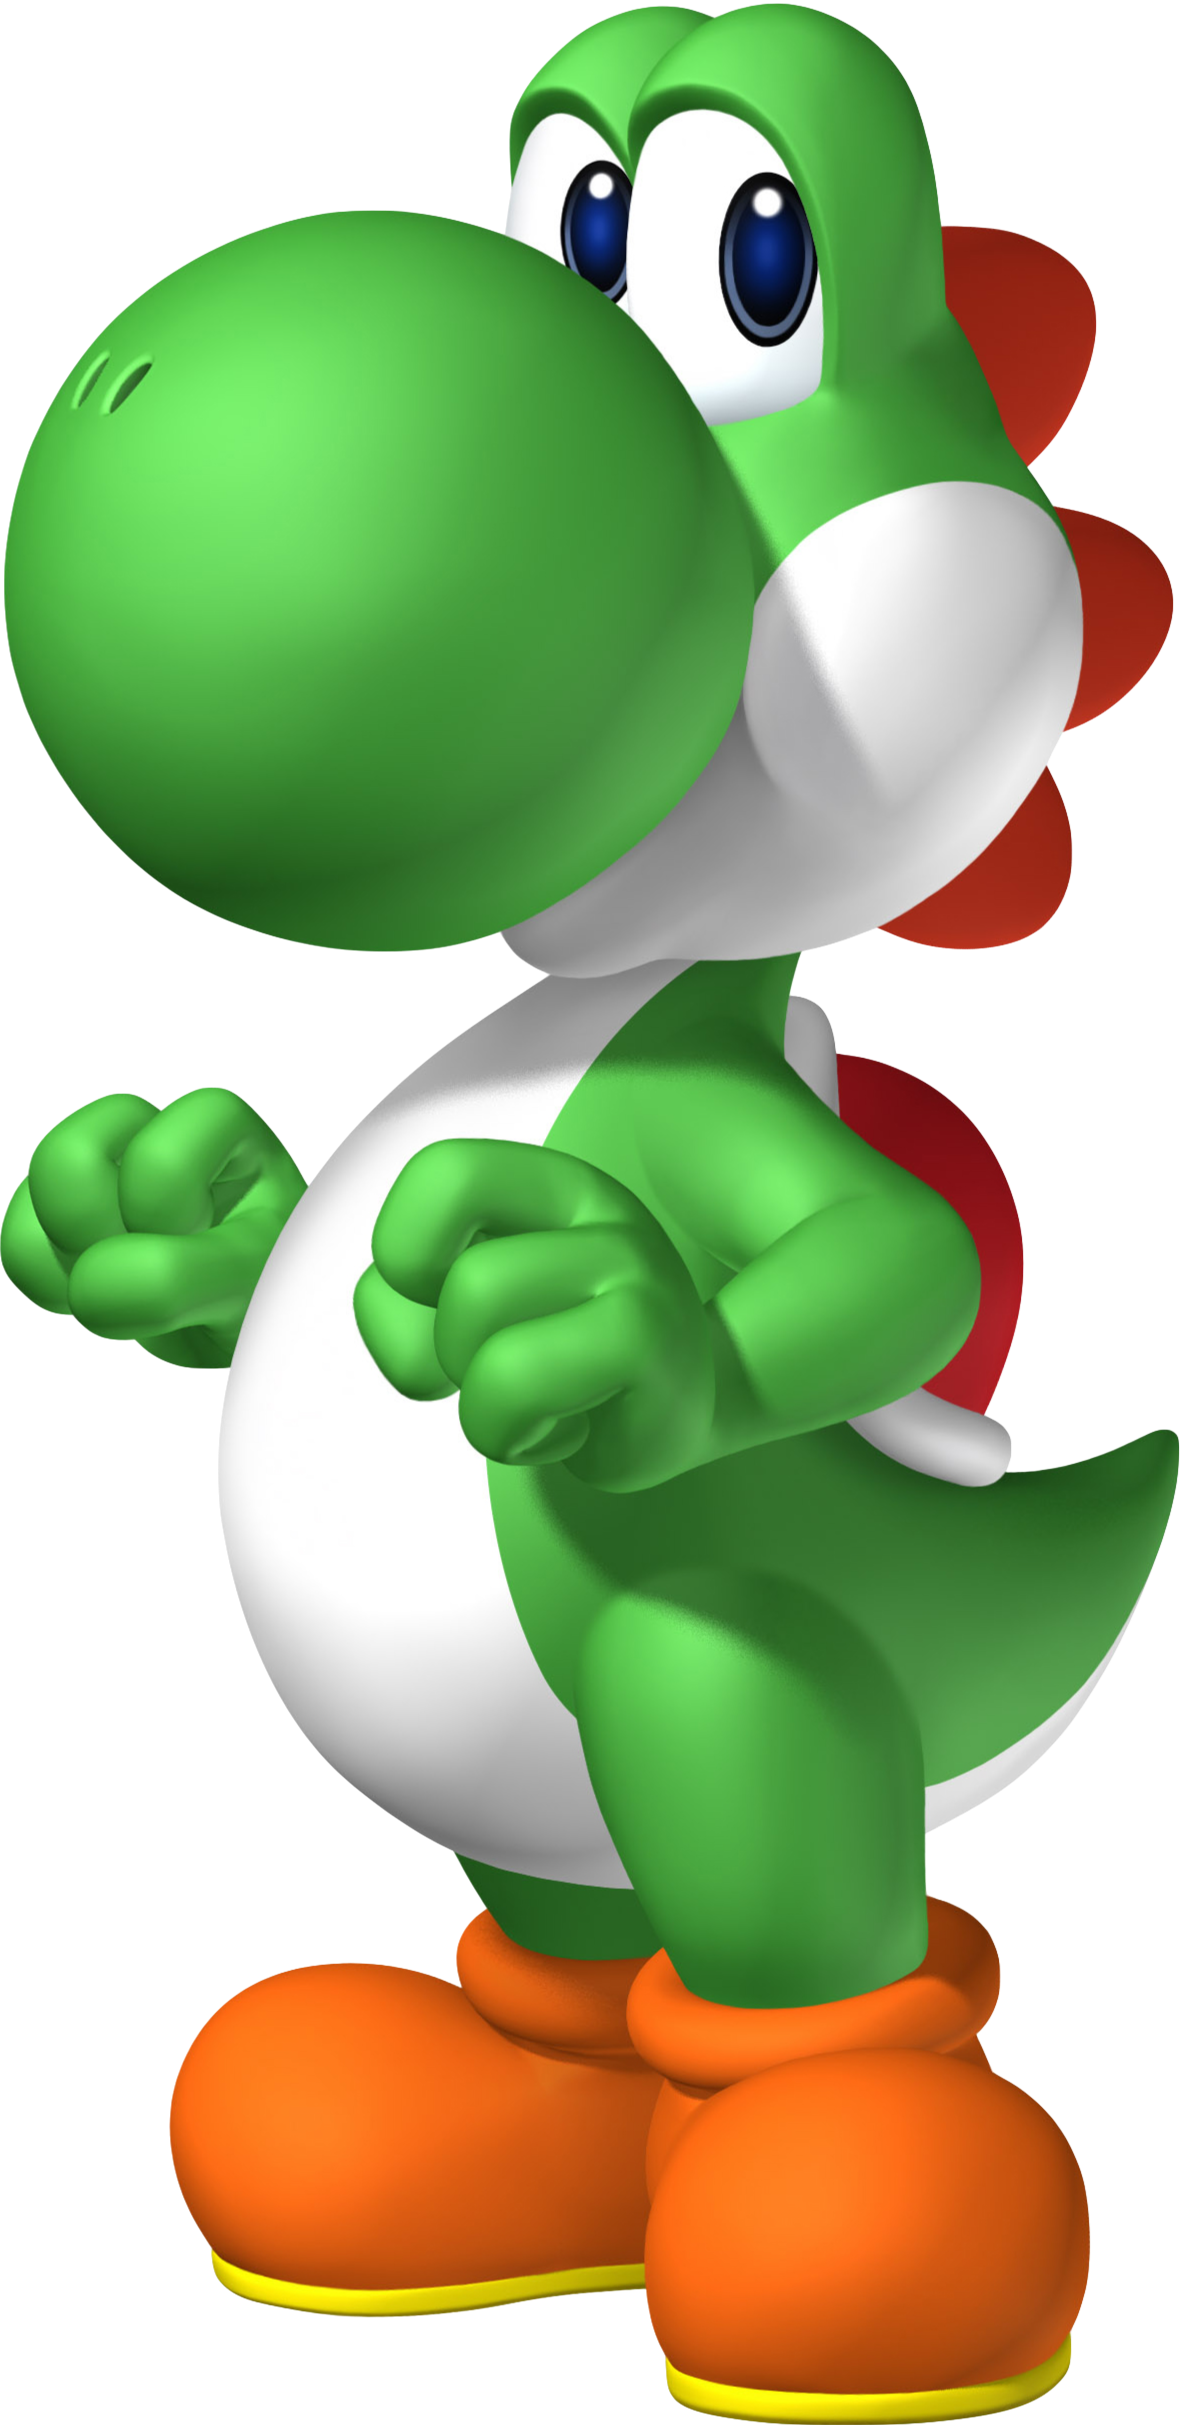 Most Viewed Yoshi Wallpapers 4k Wallpapers